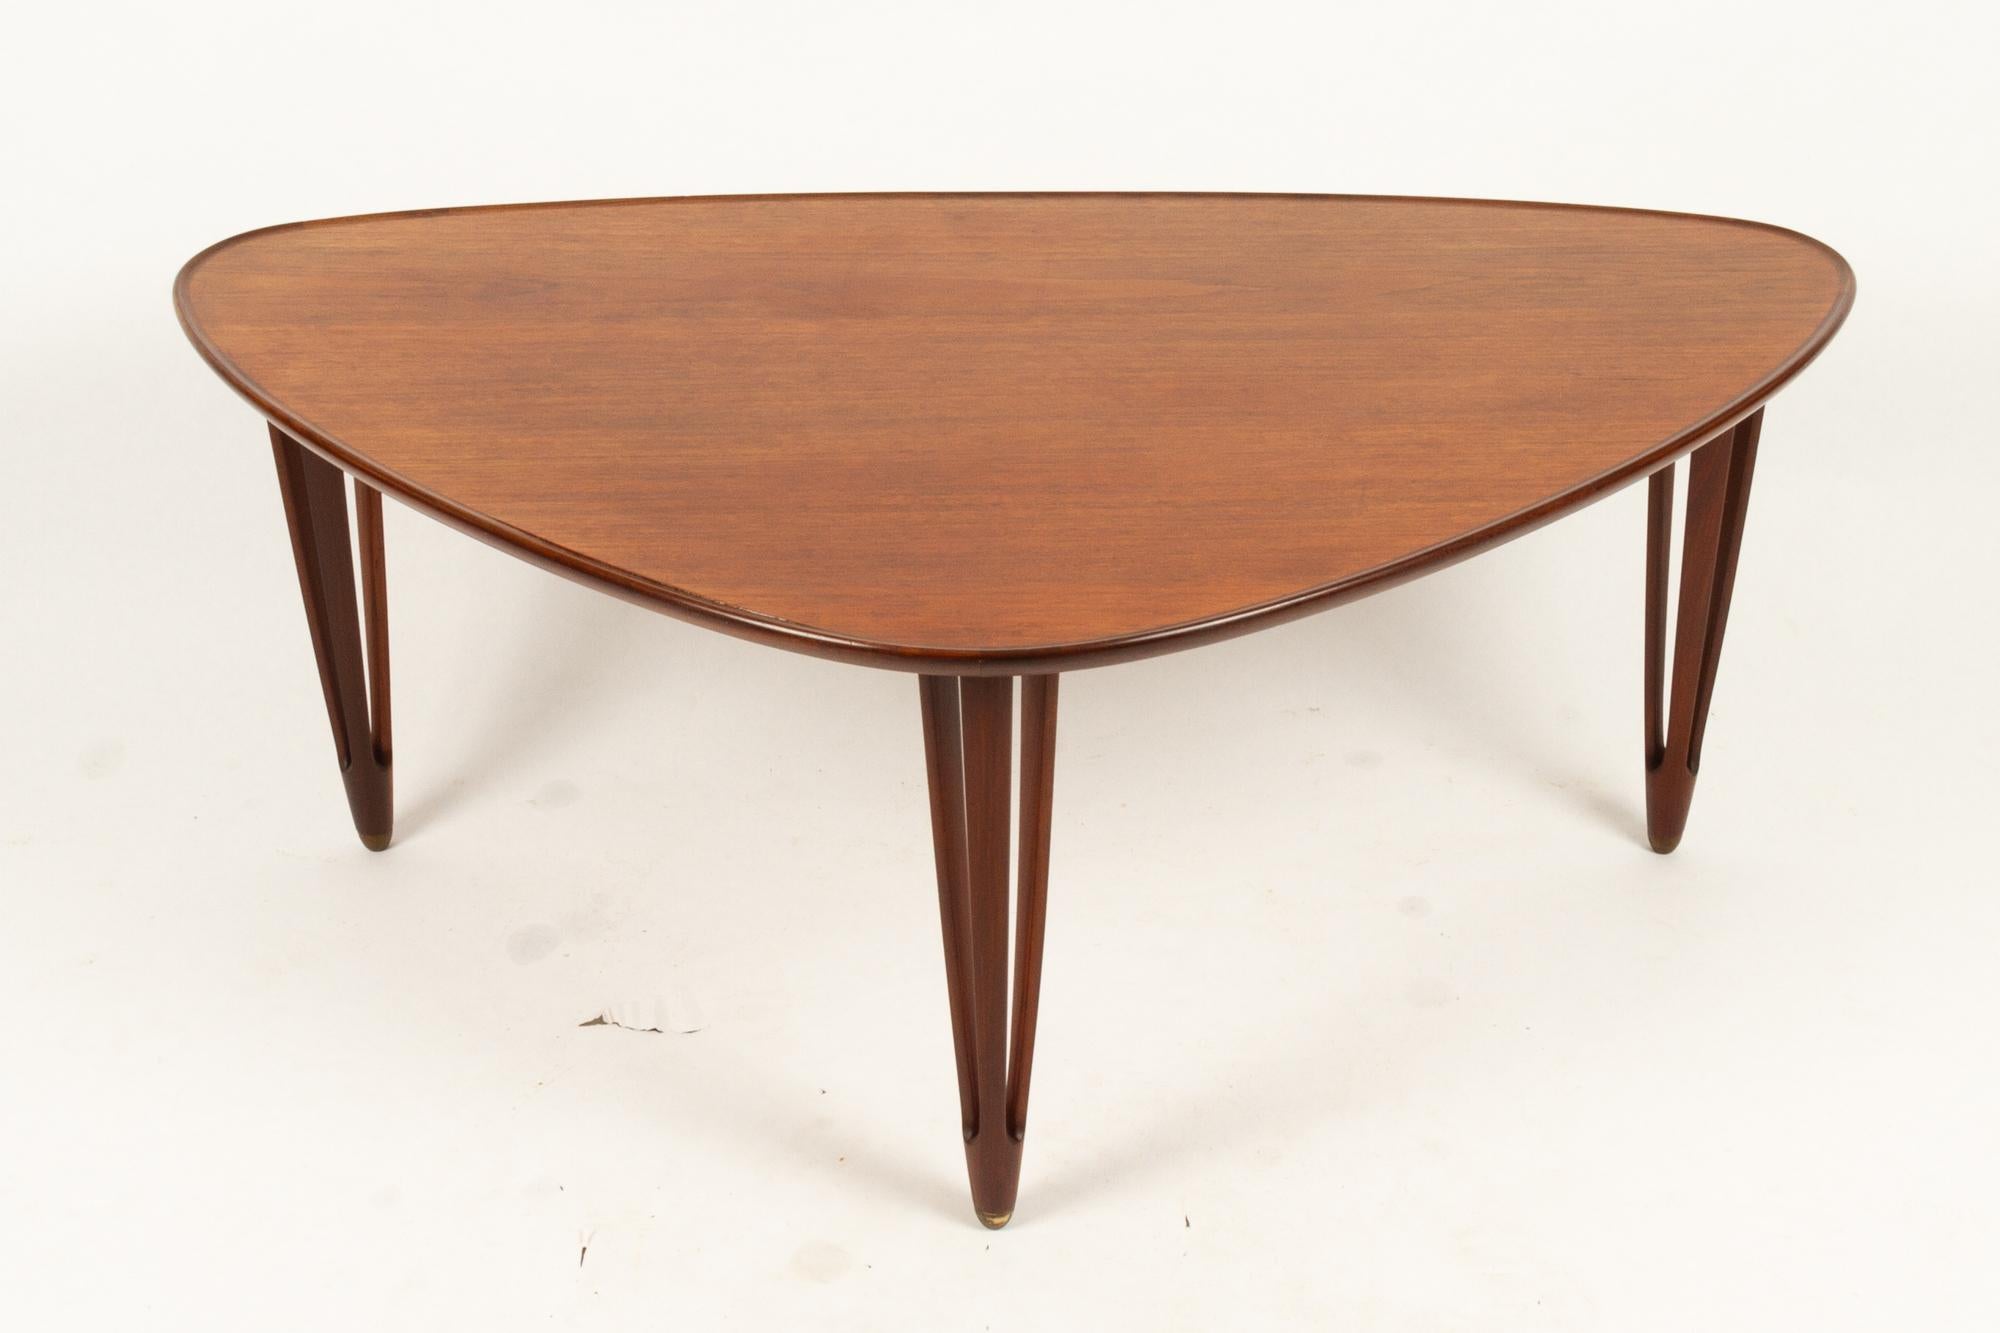 Danish triangular teak coffee table 1950s
Very stylish Mid-Century Modern coffee table with three split legs. Organic triangular shape with rounded corners. Carved legs in solid teak. Raised edge also in solid teak. Beautiful craftsmanship.
Marked